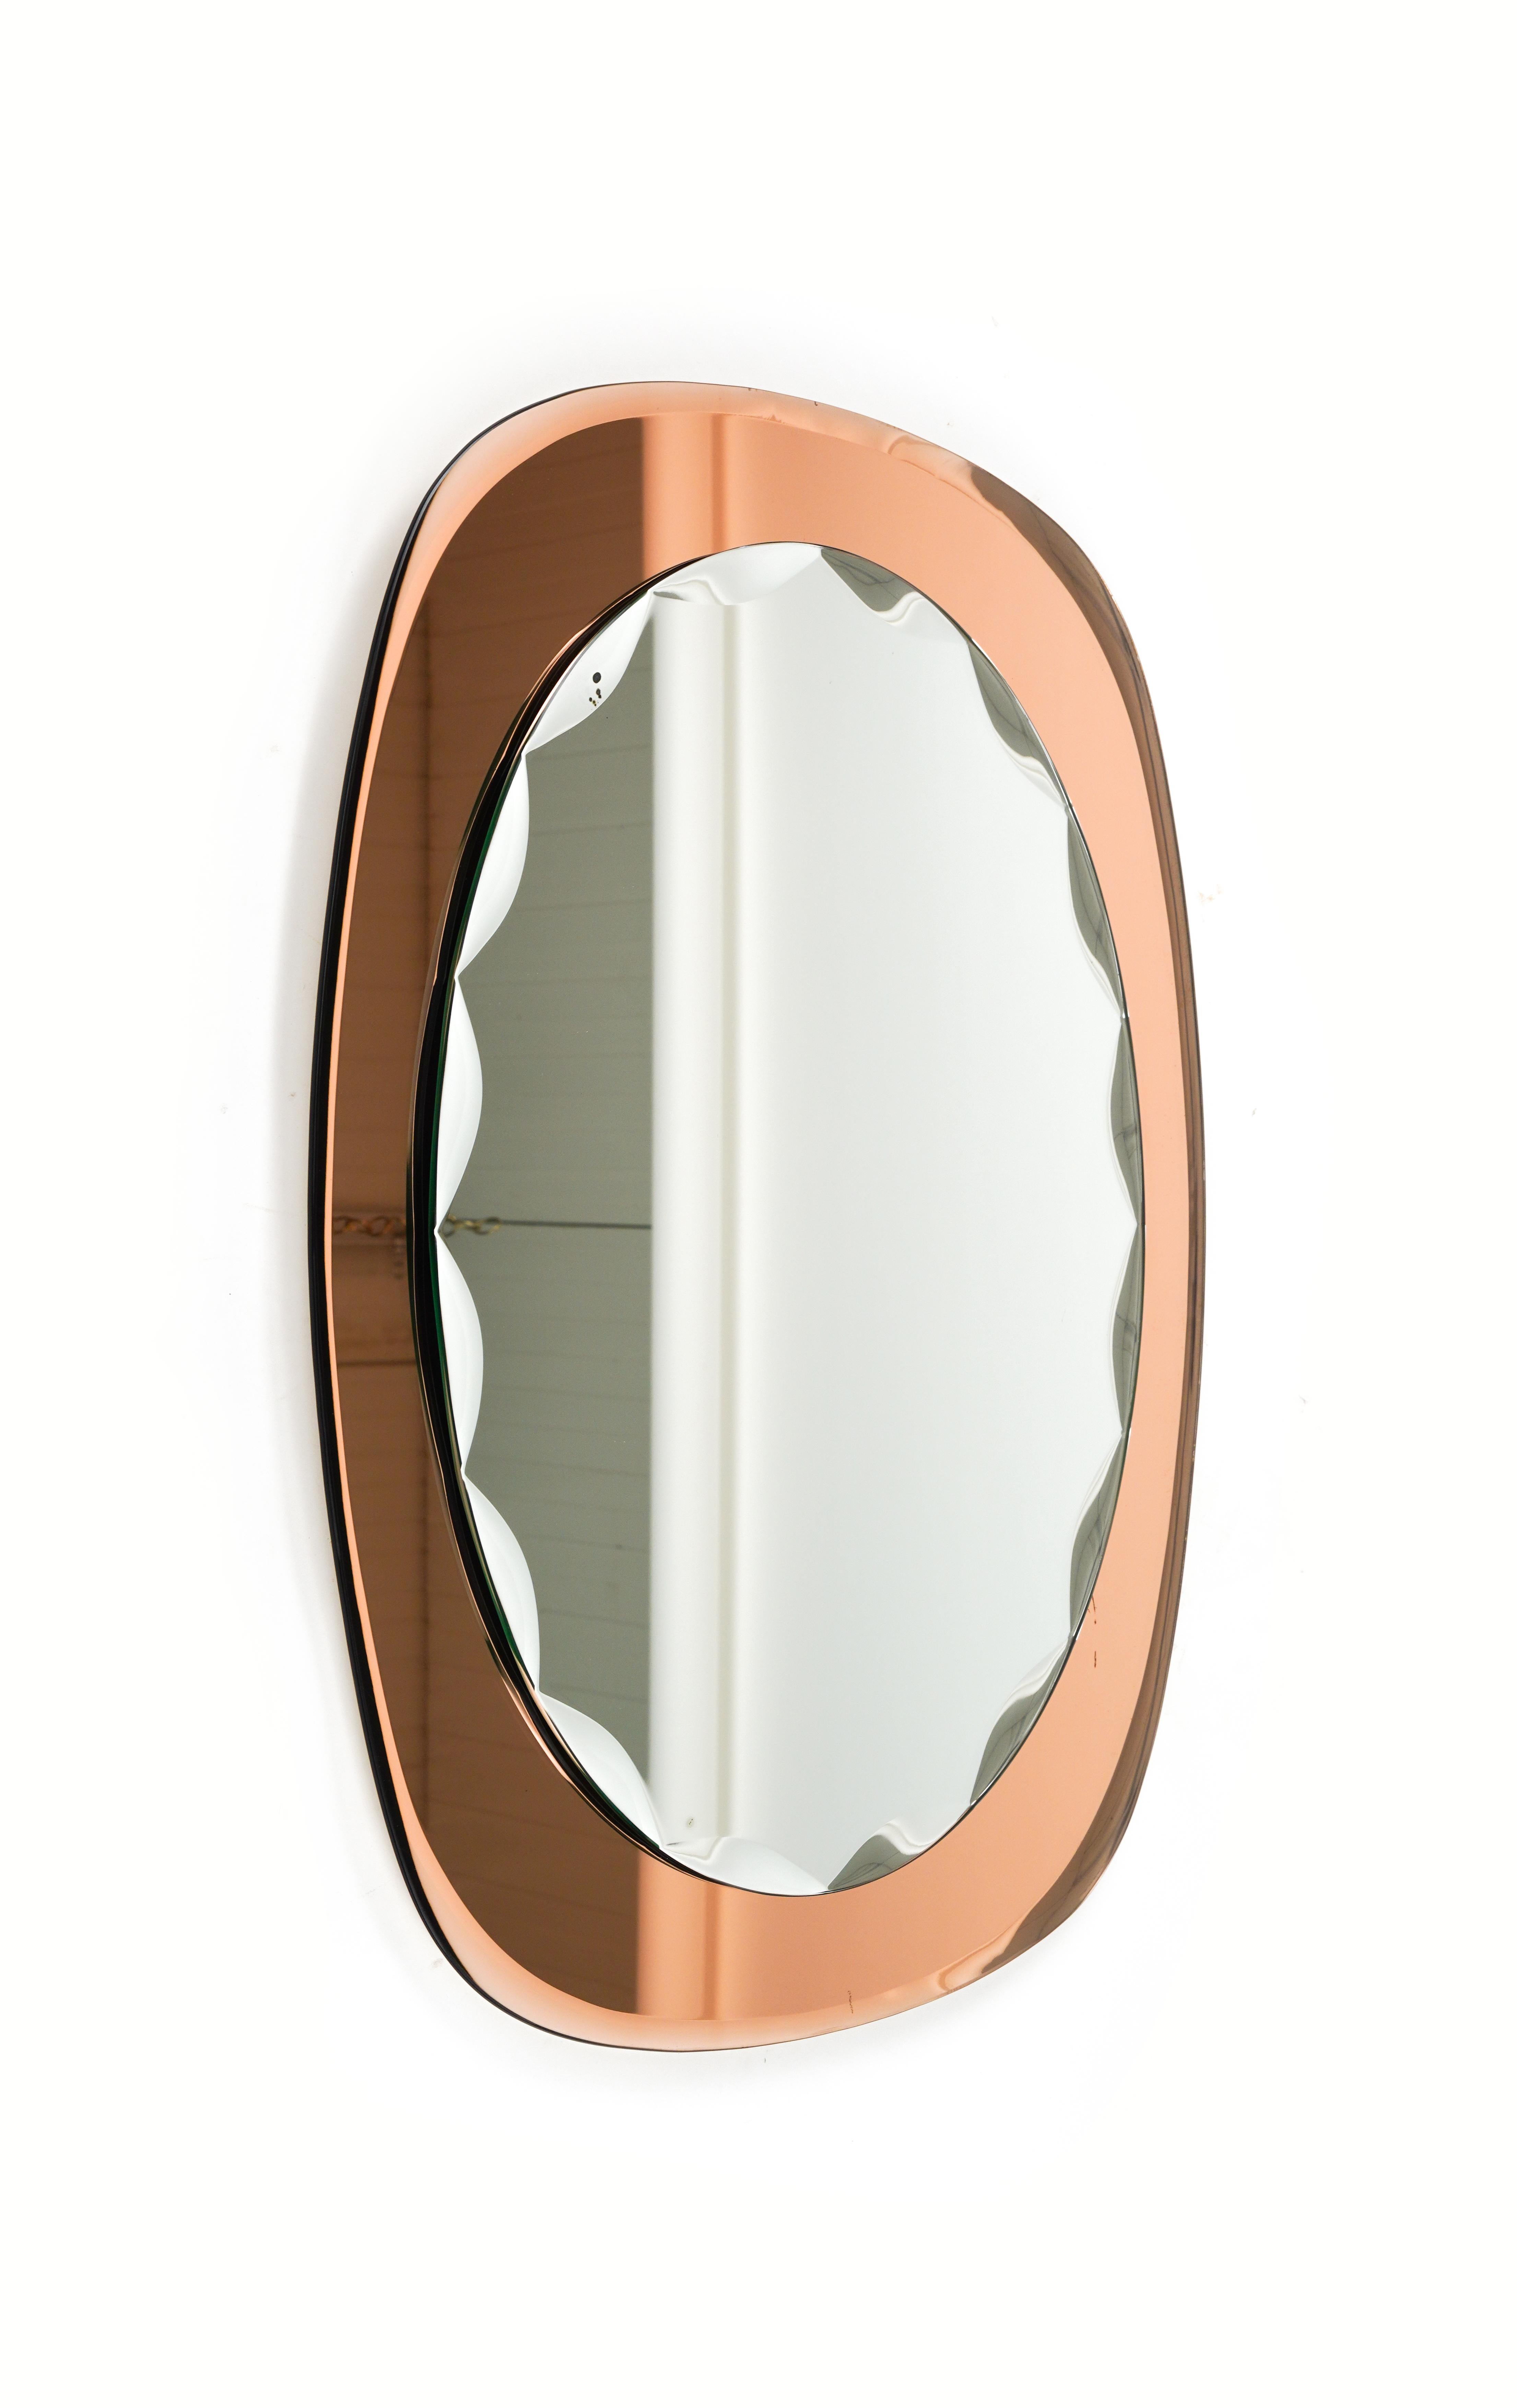 Italian Midcentury Oval Wall Mirror rose gold Glass Frame by Cristal Arte, Italy 1960s For Sale